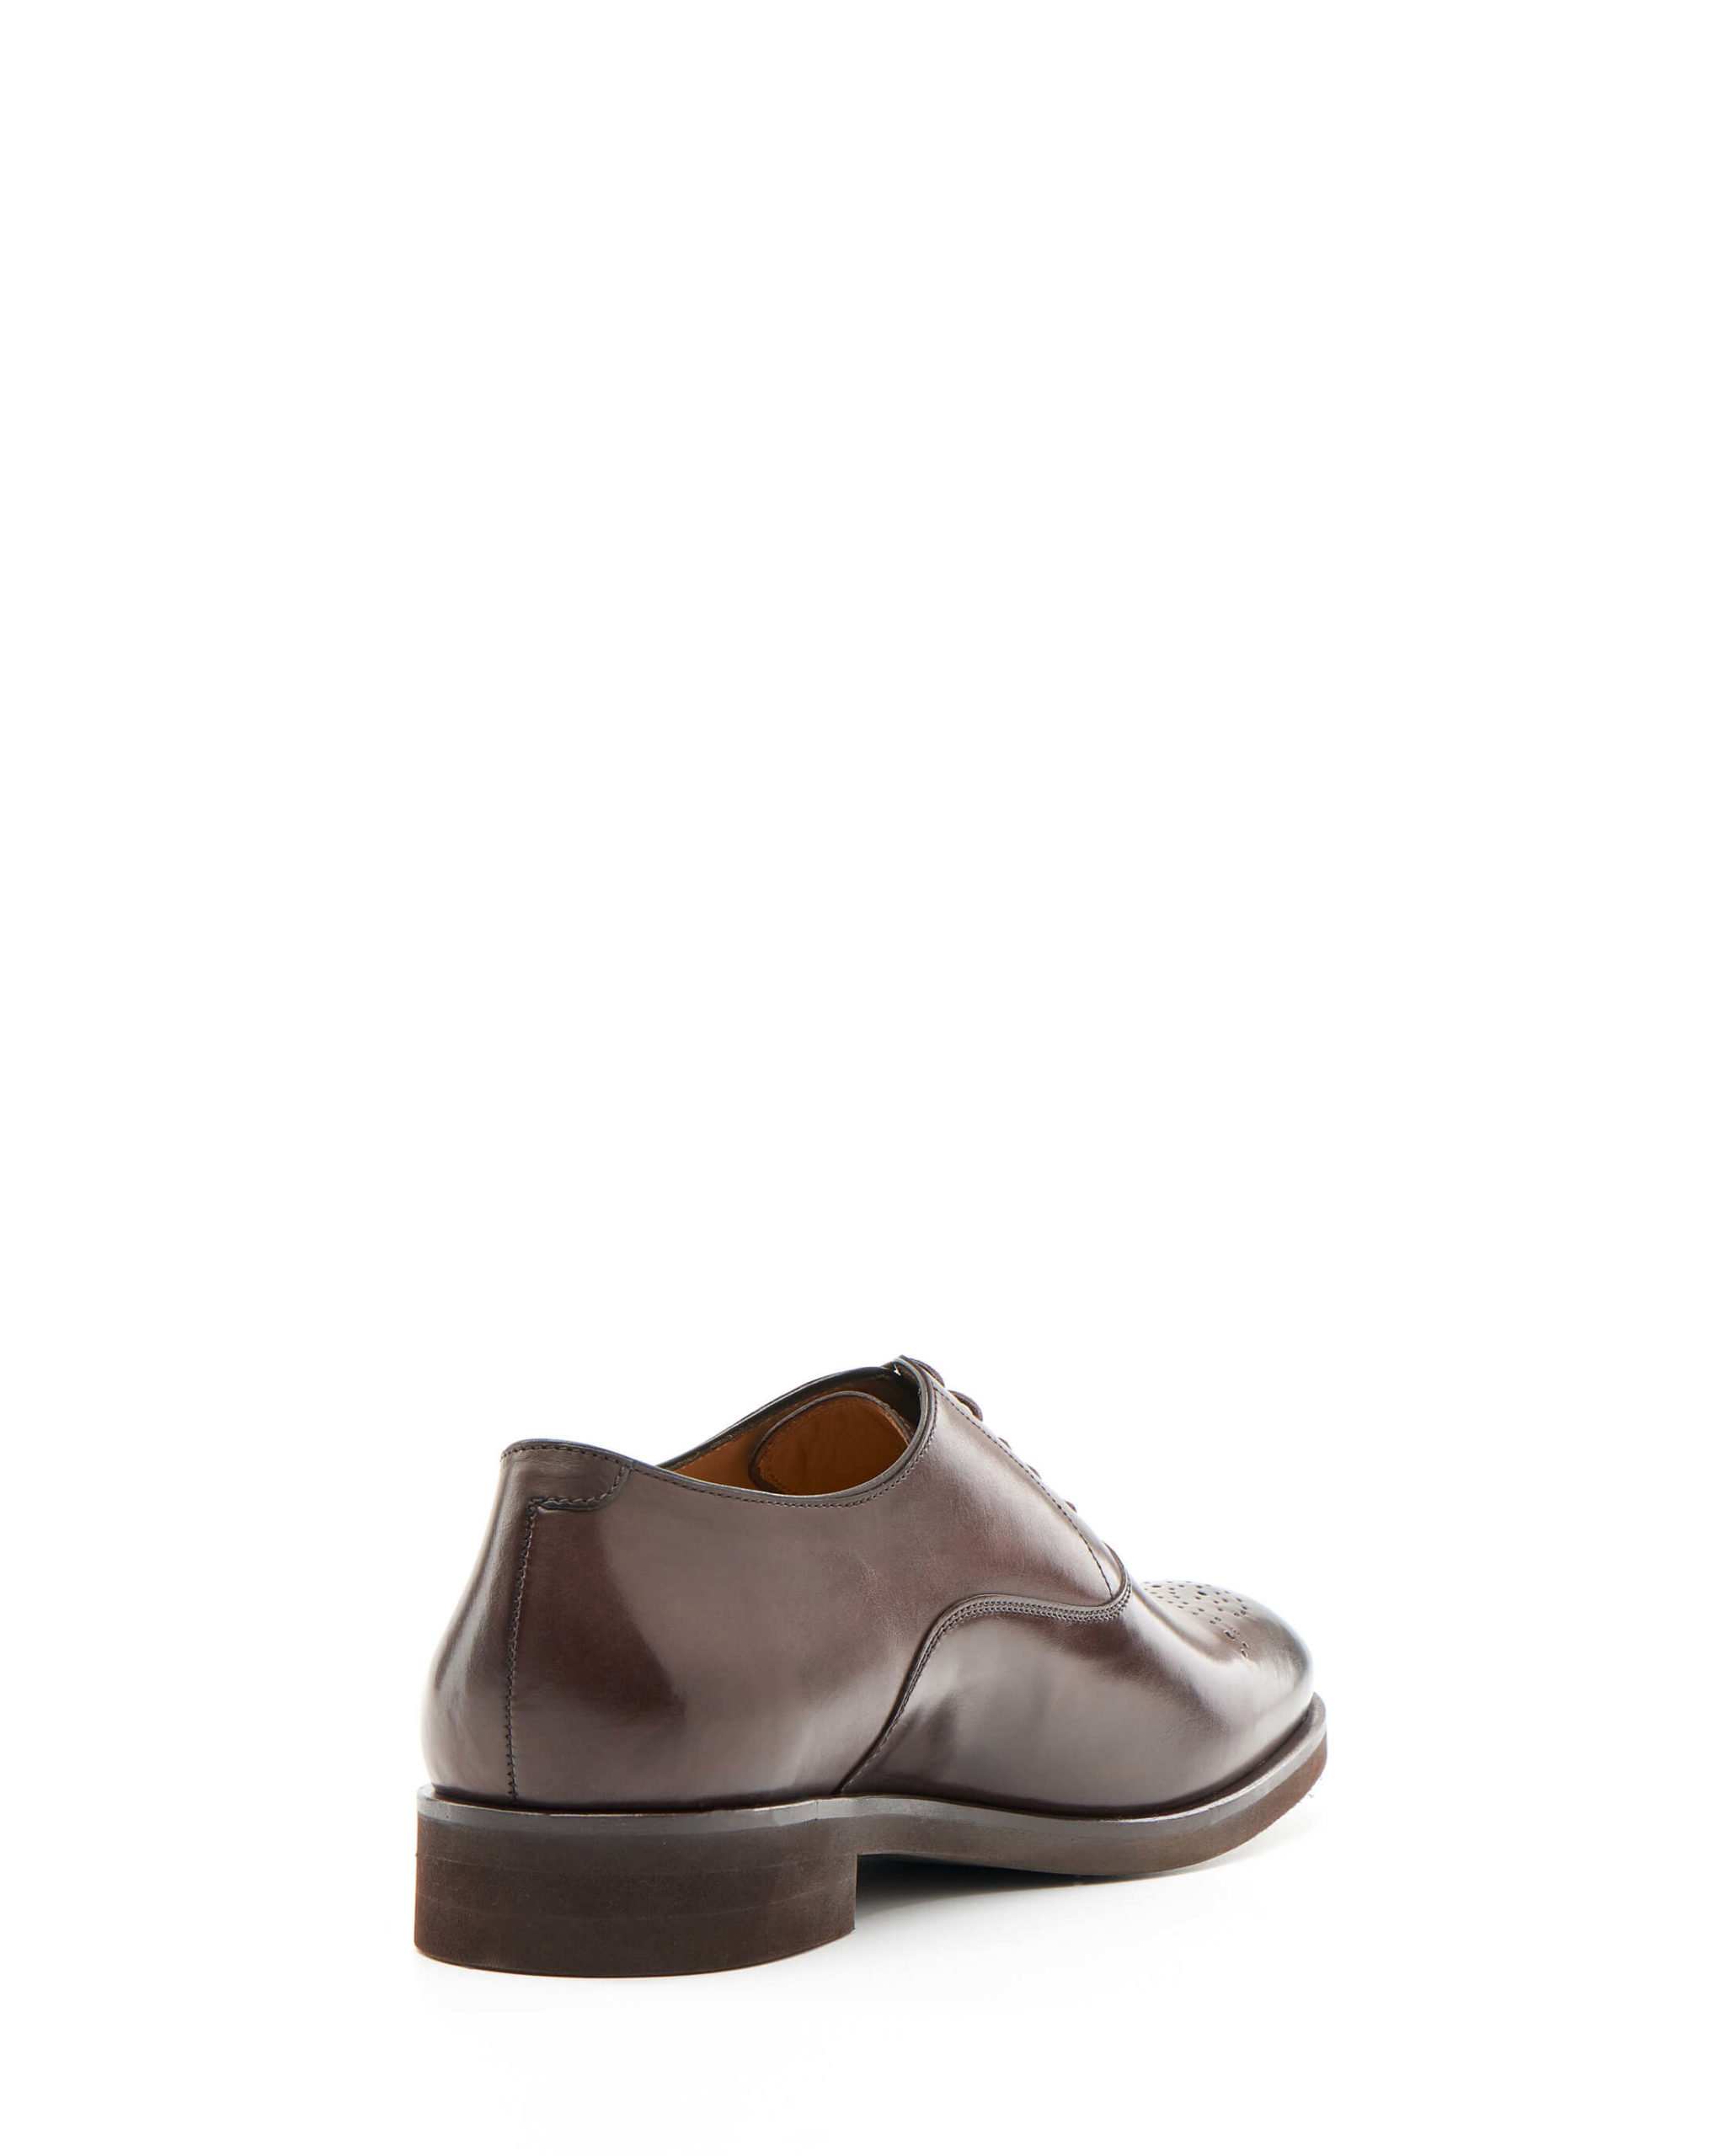 Luis Onofre Portuguese Shoes FW22 – HS0785_02 – Decaf Brown-3